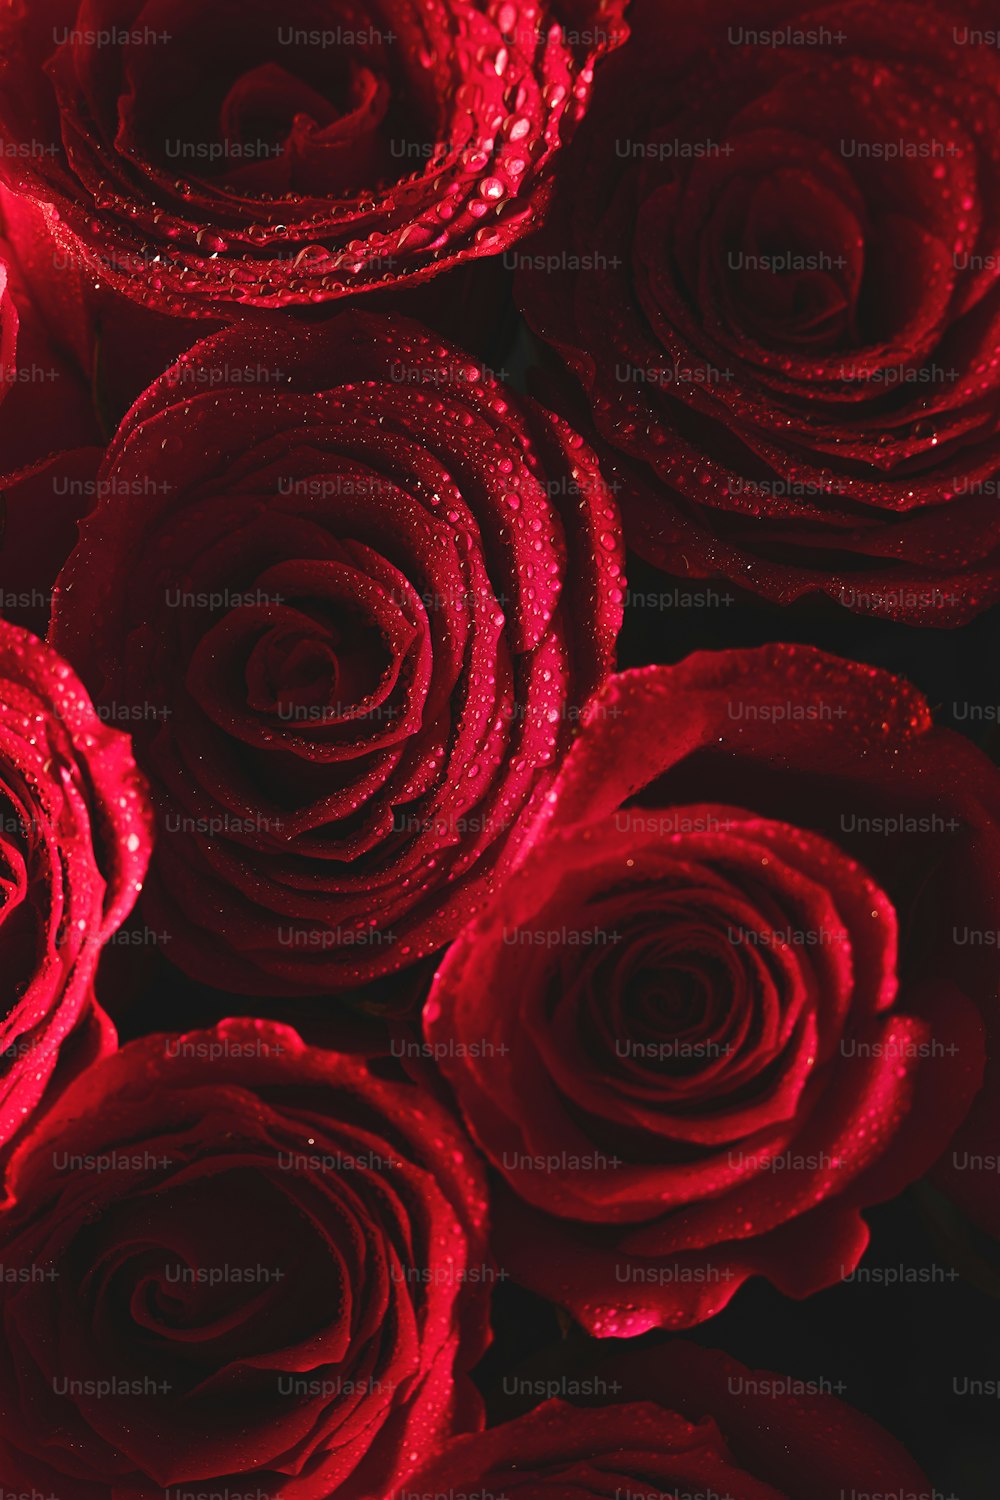 a close up of a bunch of red roses